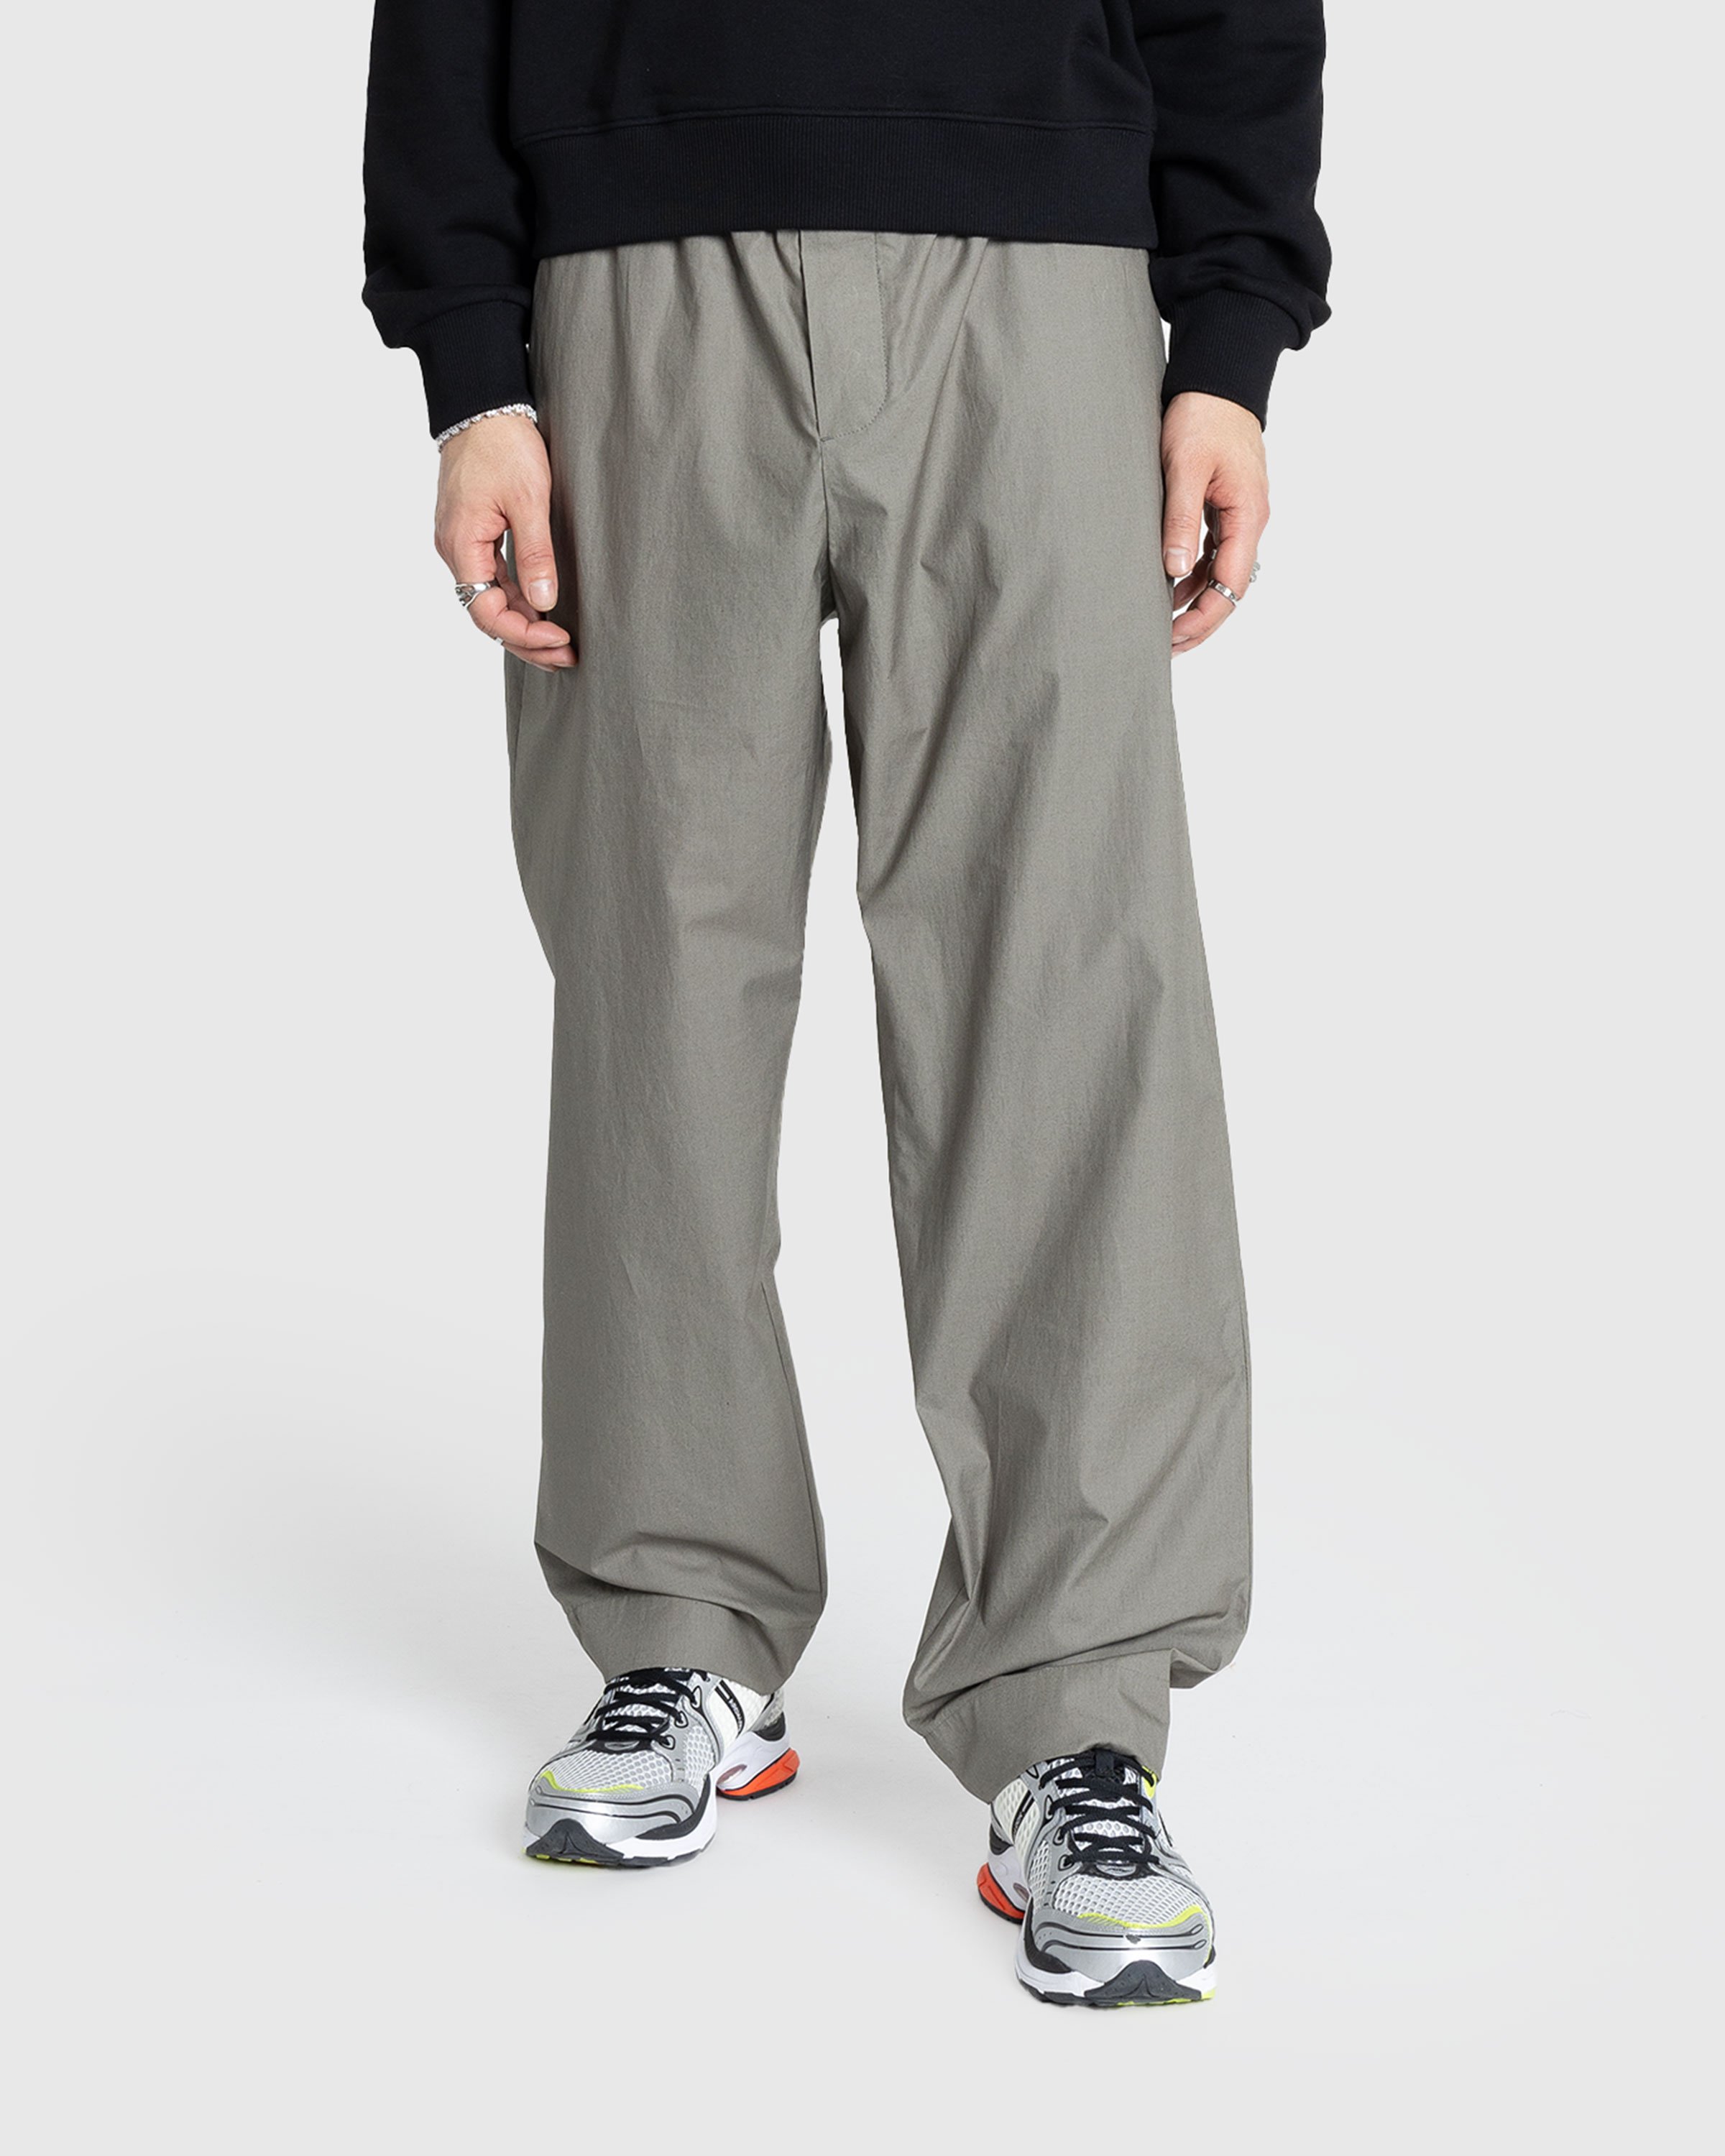 Meta Campania Collective - Ed Unlined Light Weight Cotton Drawstring Trousers Weimaraner Grey - Clothing - Grey - Image 2